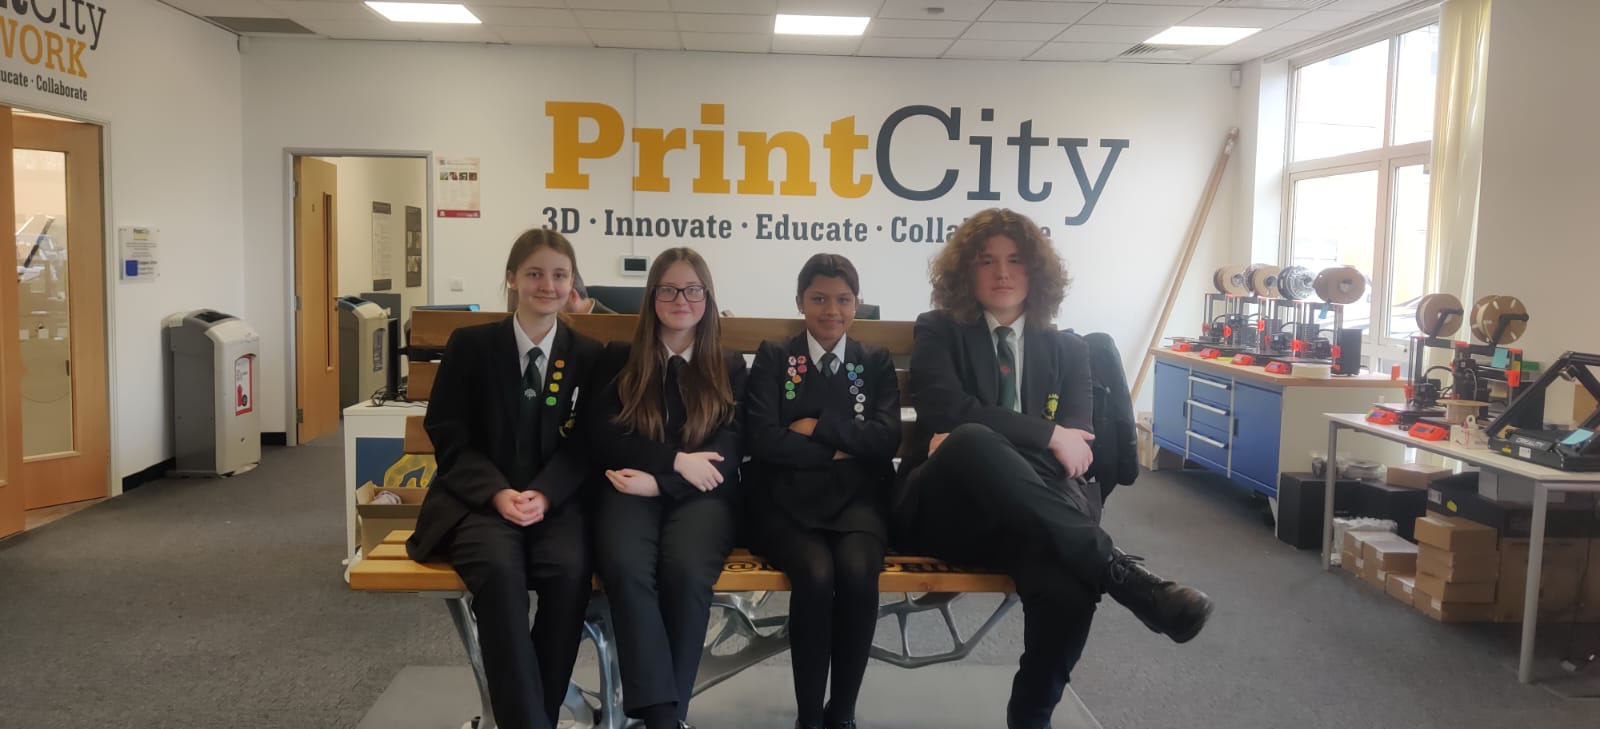 From Water Bottles to Key Rings: Students Get Creative with CAD at PrintCity! - The PrintCity Blog - Manchester Metropolitan University